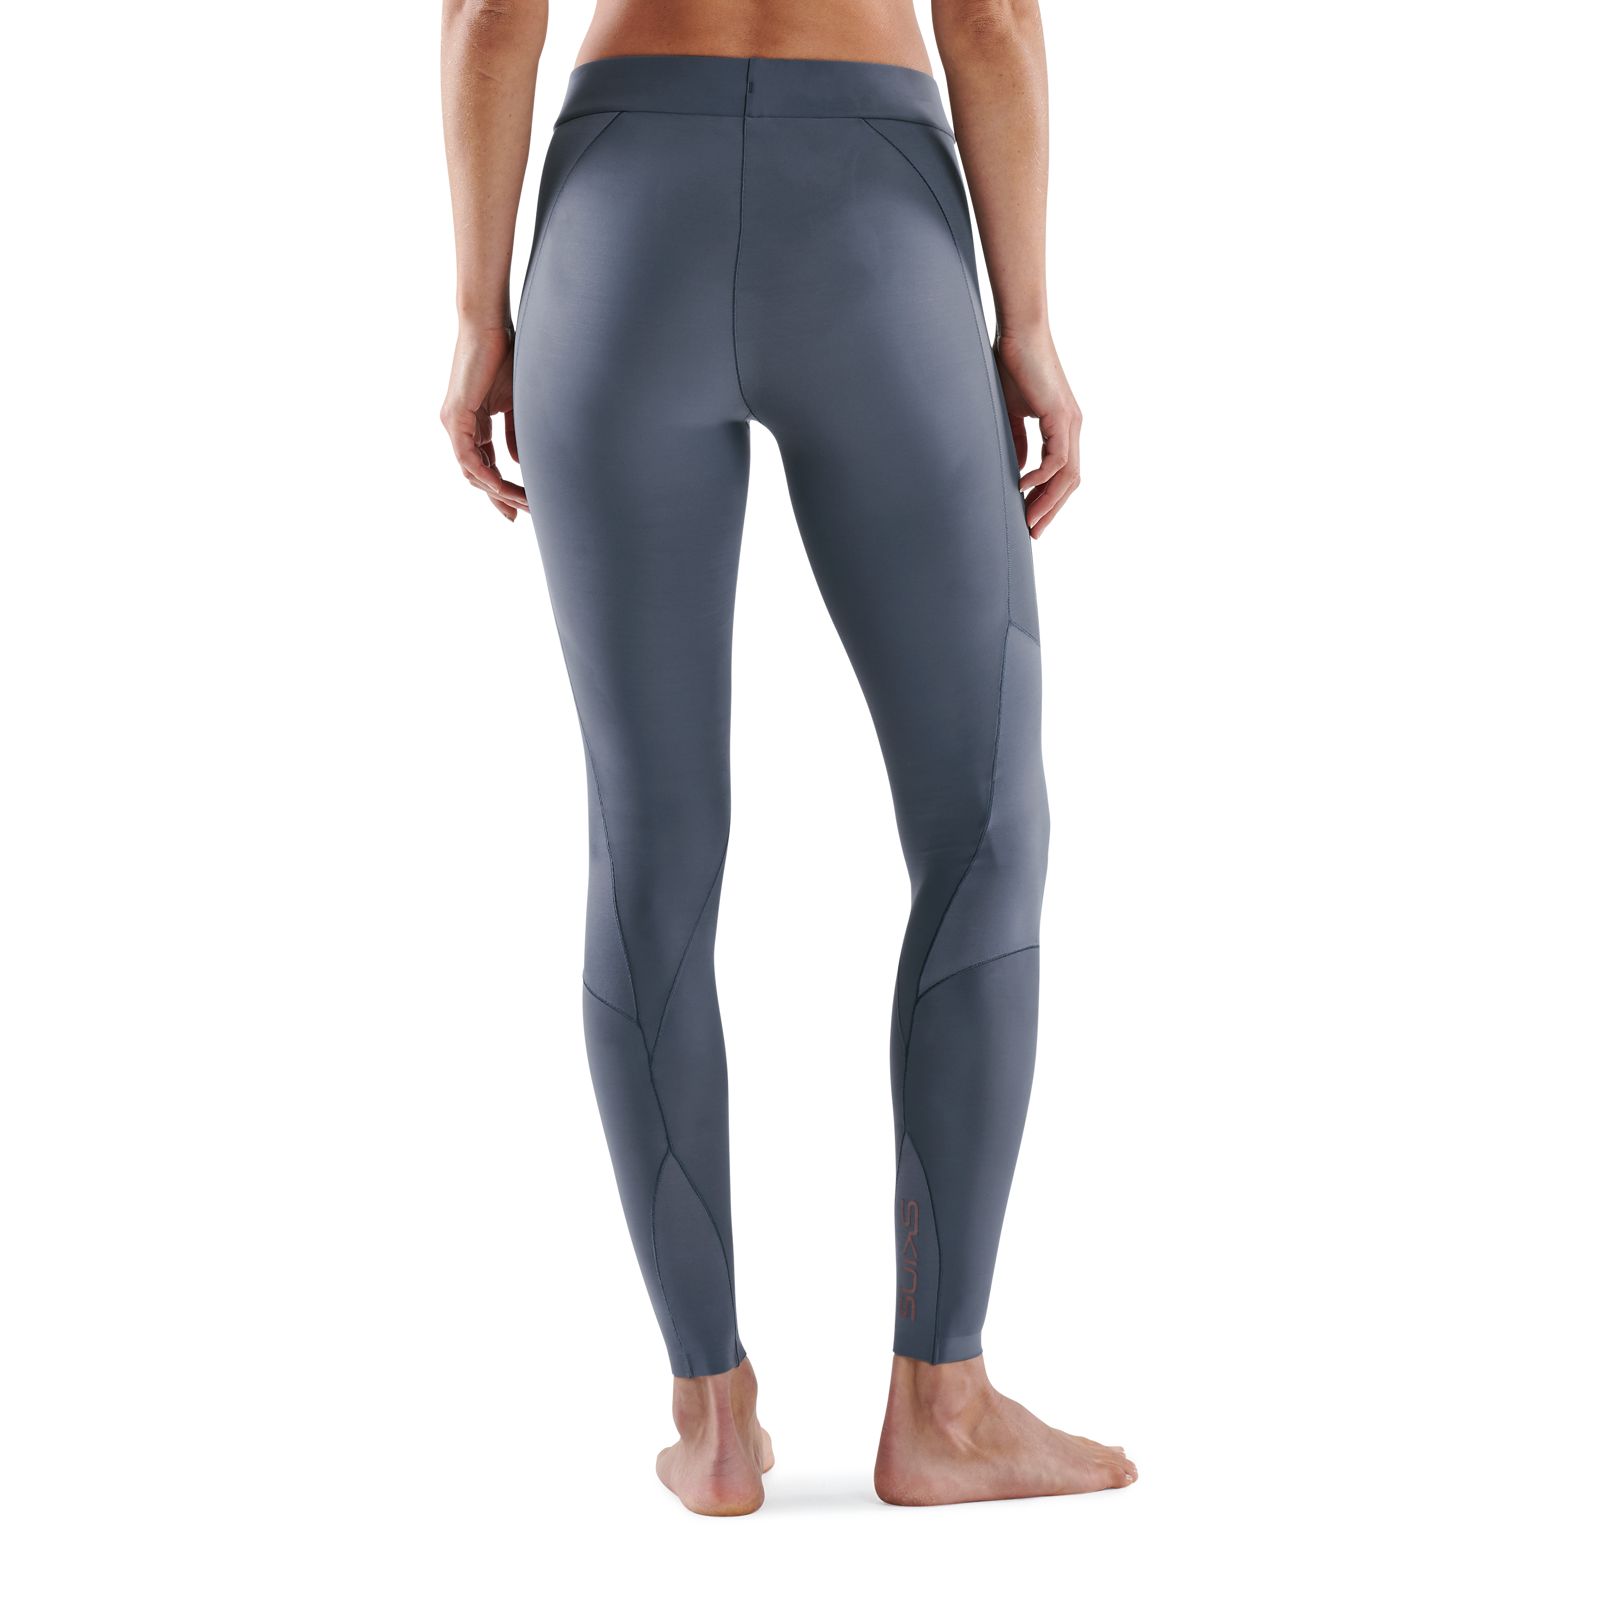 skins thermal tights - 6 results